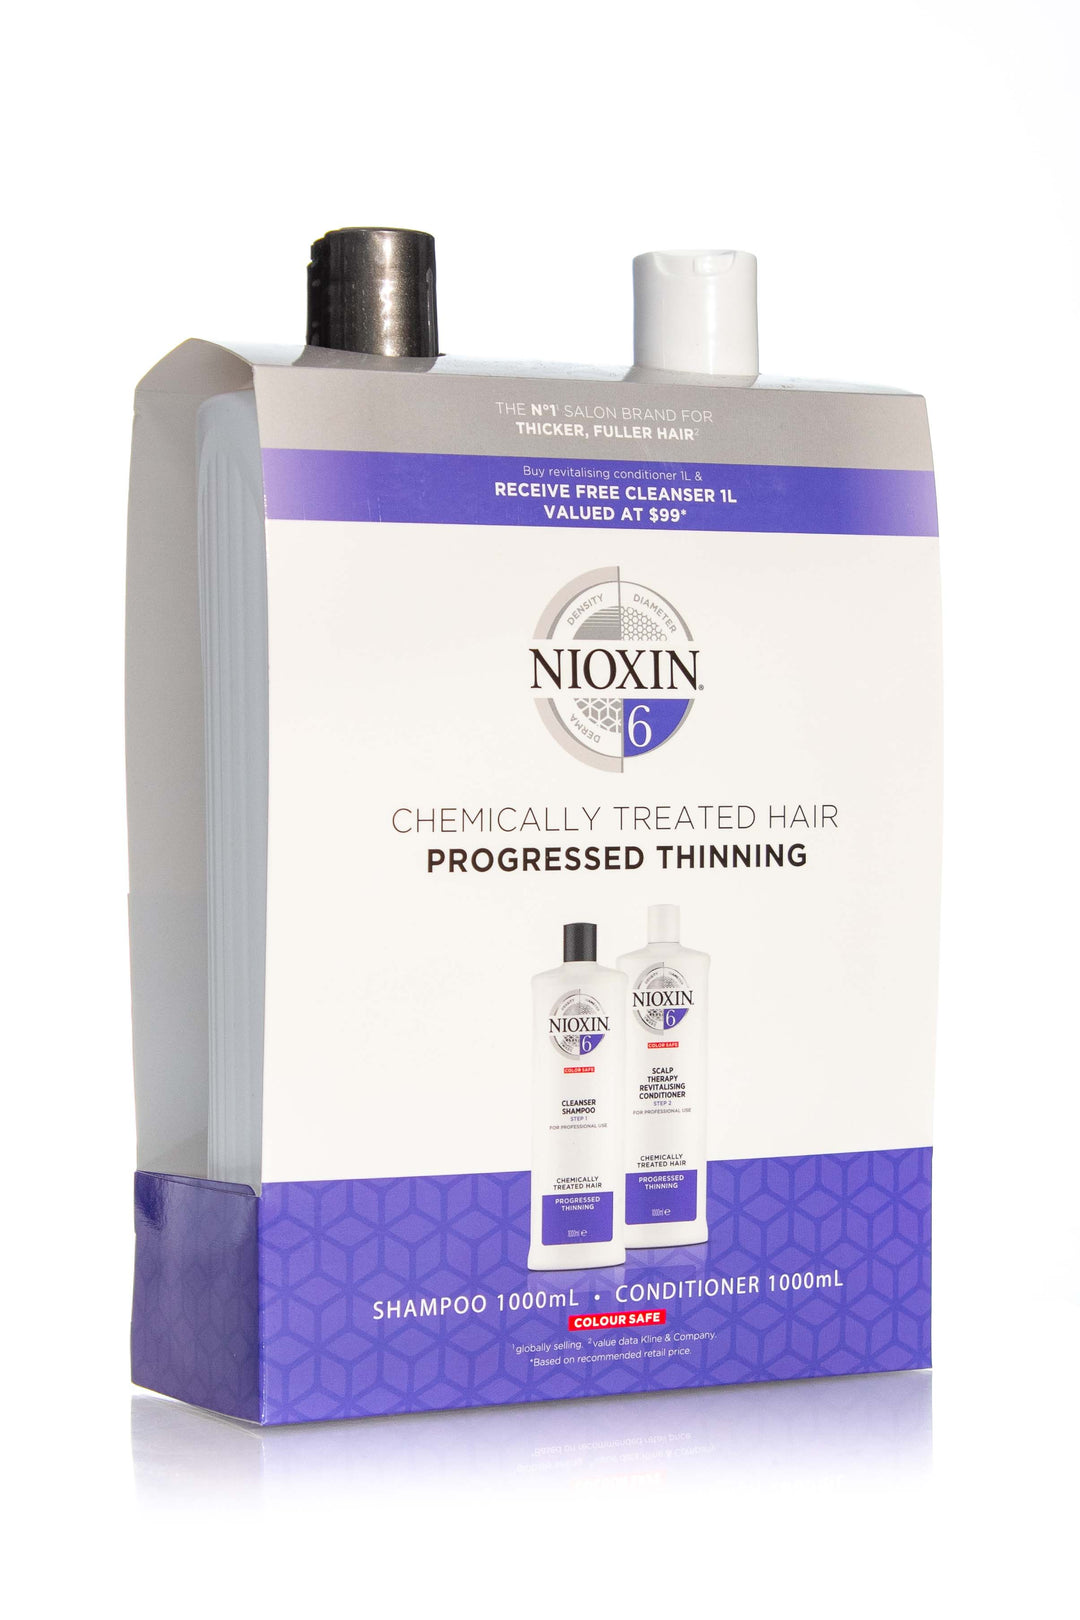 NIOXIN SYSTEM 6 CLEANSER SHAMPOO & SCALP THERAPY REVITALISING CONDITIONER 1L DUO